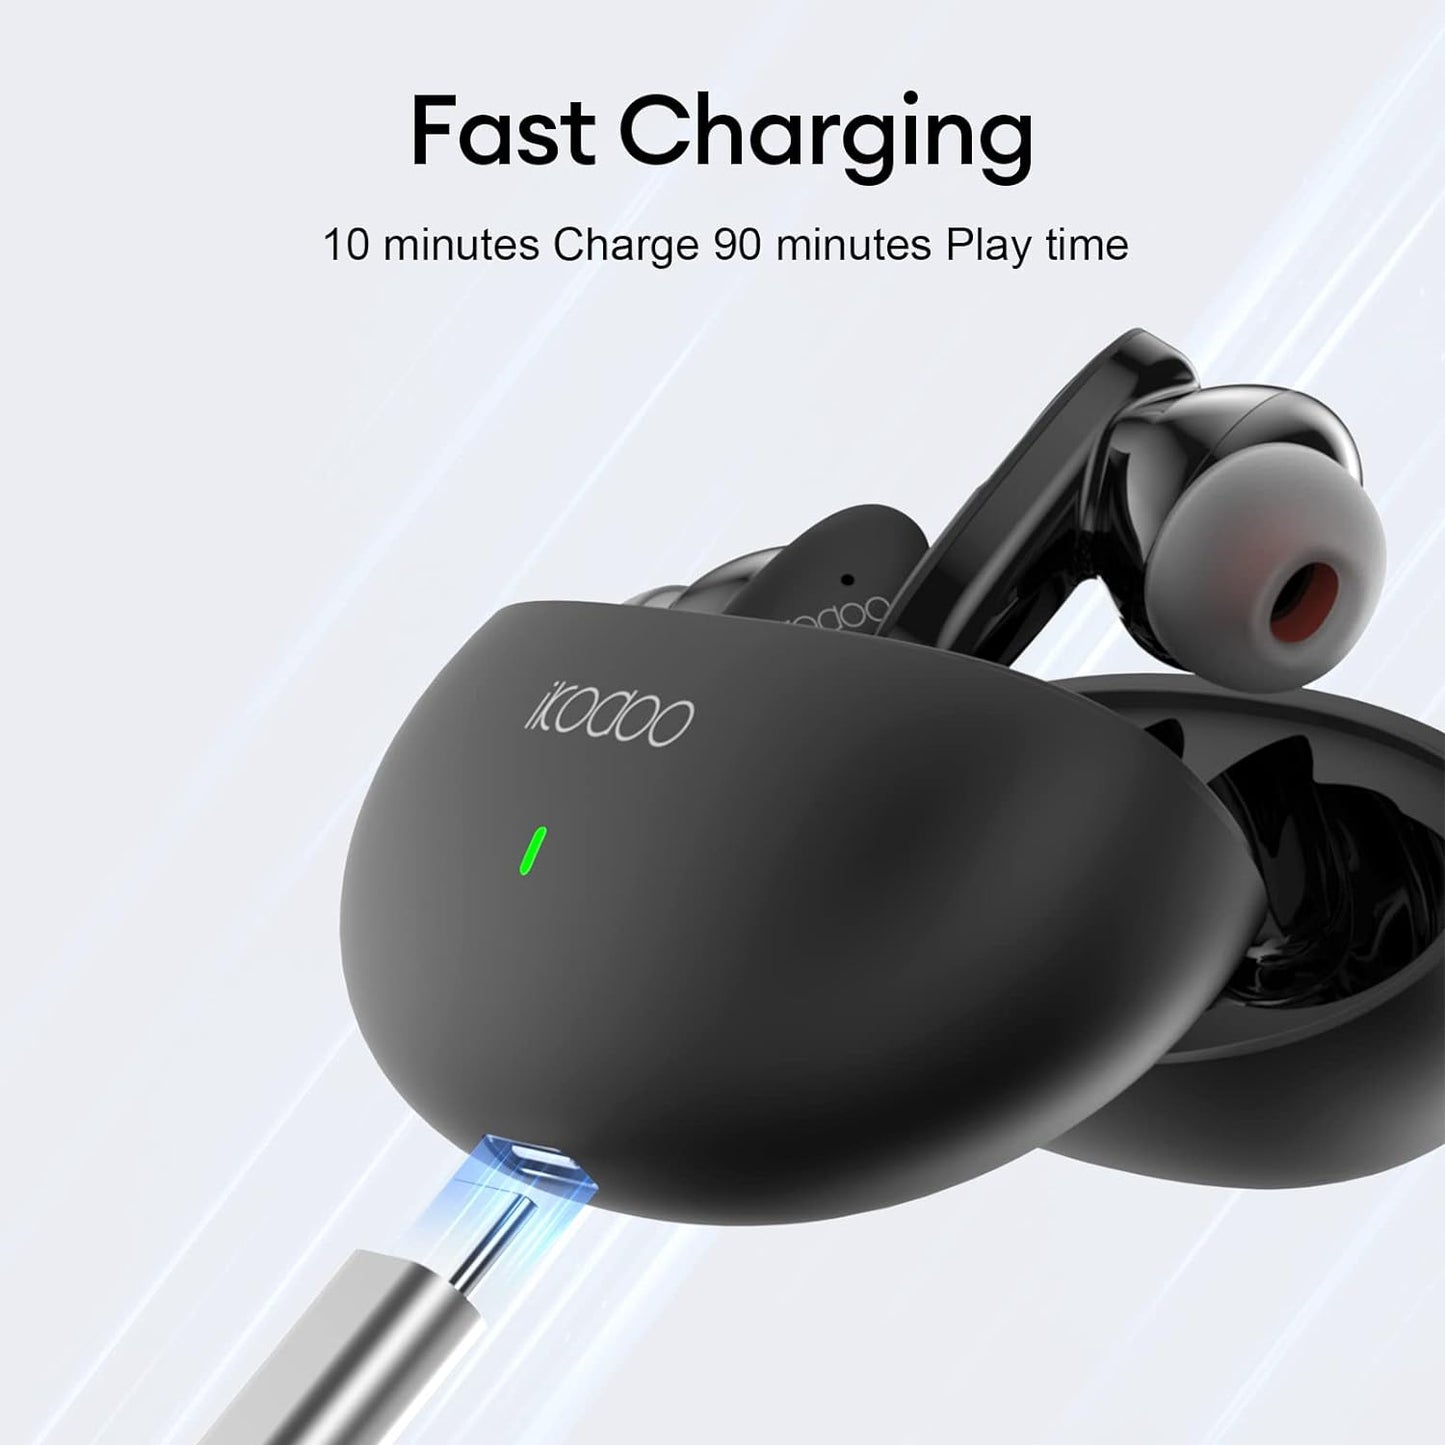 IKODOO Buds Z Truly Wireless in-Ear Earbuds with Mic, AI-ENC, Upto 28 Hrs Playtime, 10mm Bass Drivers, Bluetooth 5.3, Quick Pair, IPX4, Type-C, Fast Charging-(10 Min = 90 Min) White